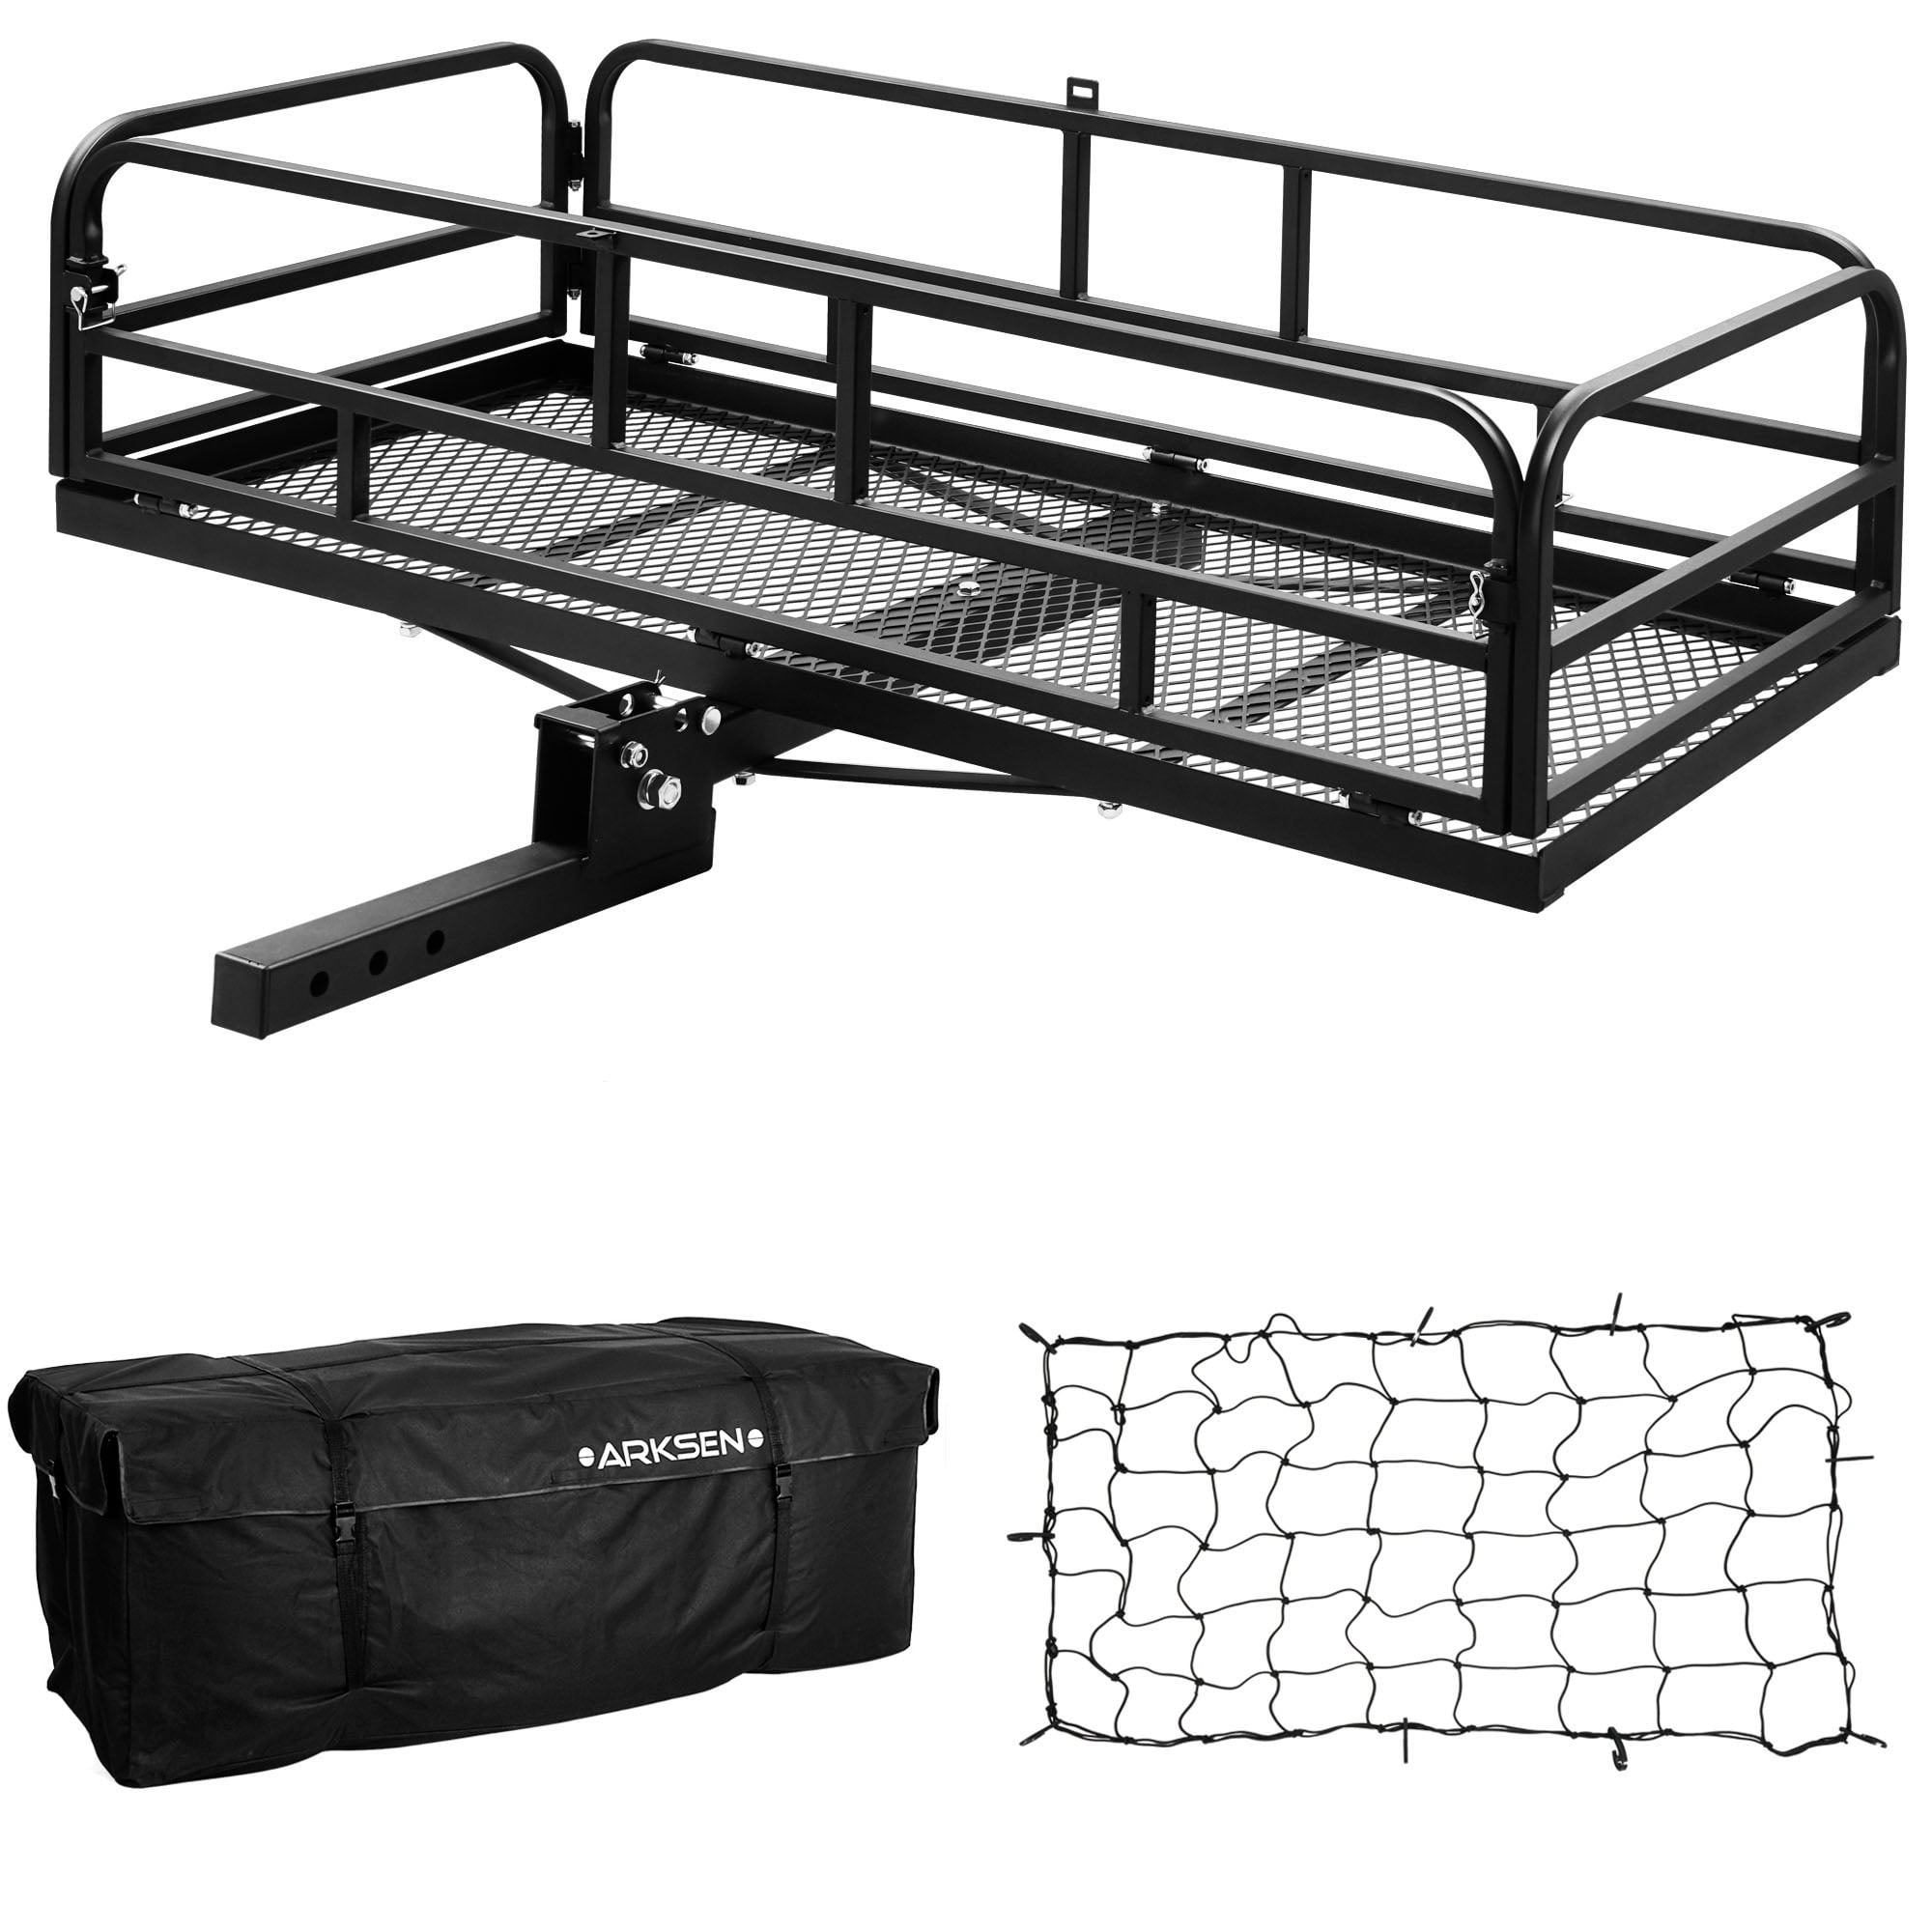 Black Steel ARKSEN Foldable 60x 24x 14 Luggage Cargo Carrier Basket W/Cargo Bag Combo Trailer Hitch Carrier Fit 2 Receiver,500 lbs Capacity 